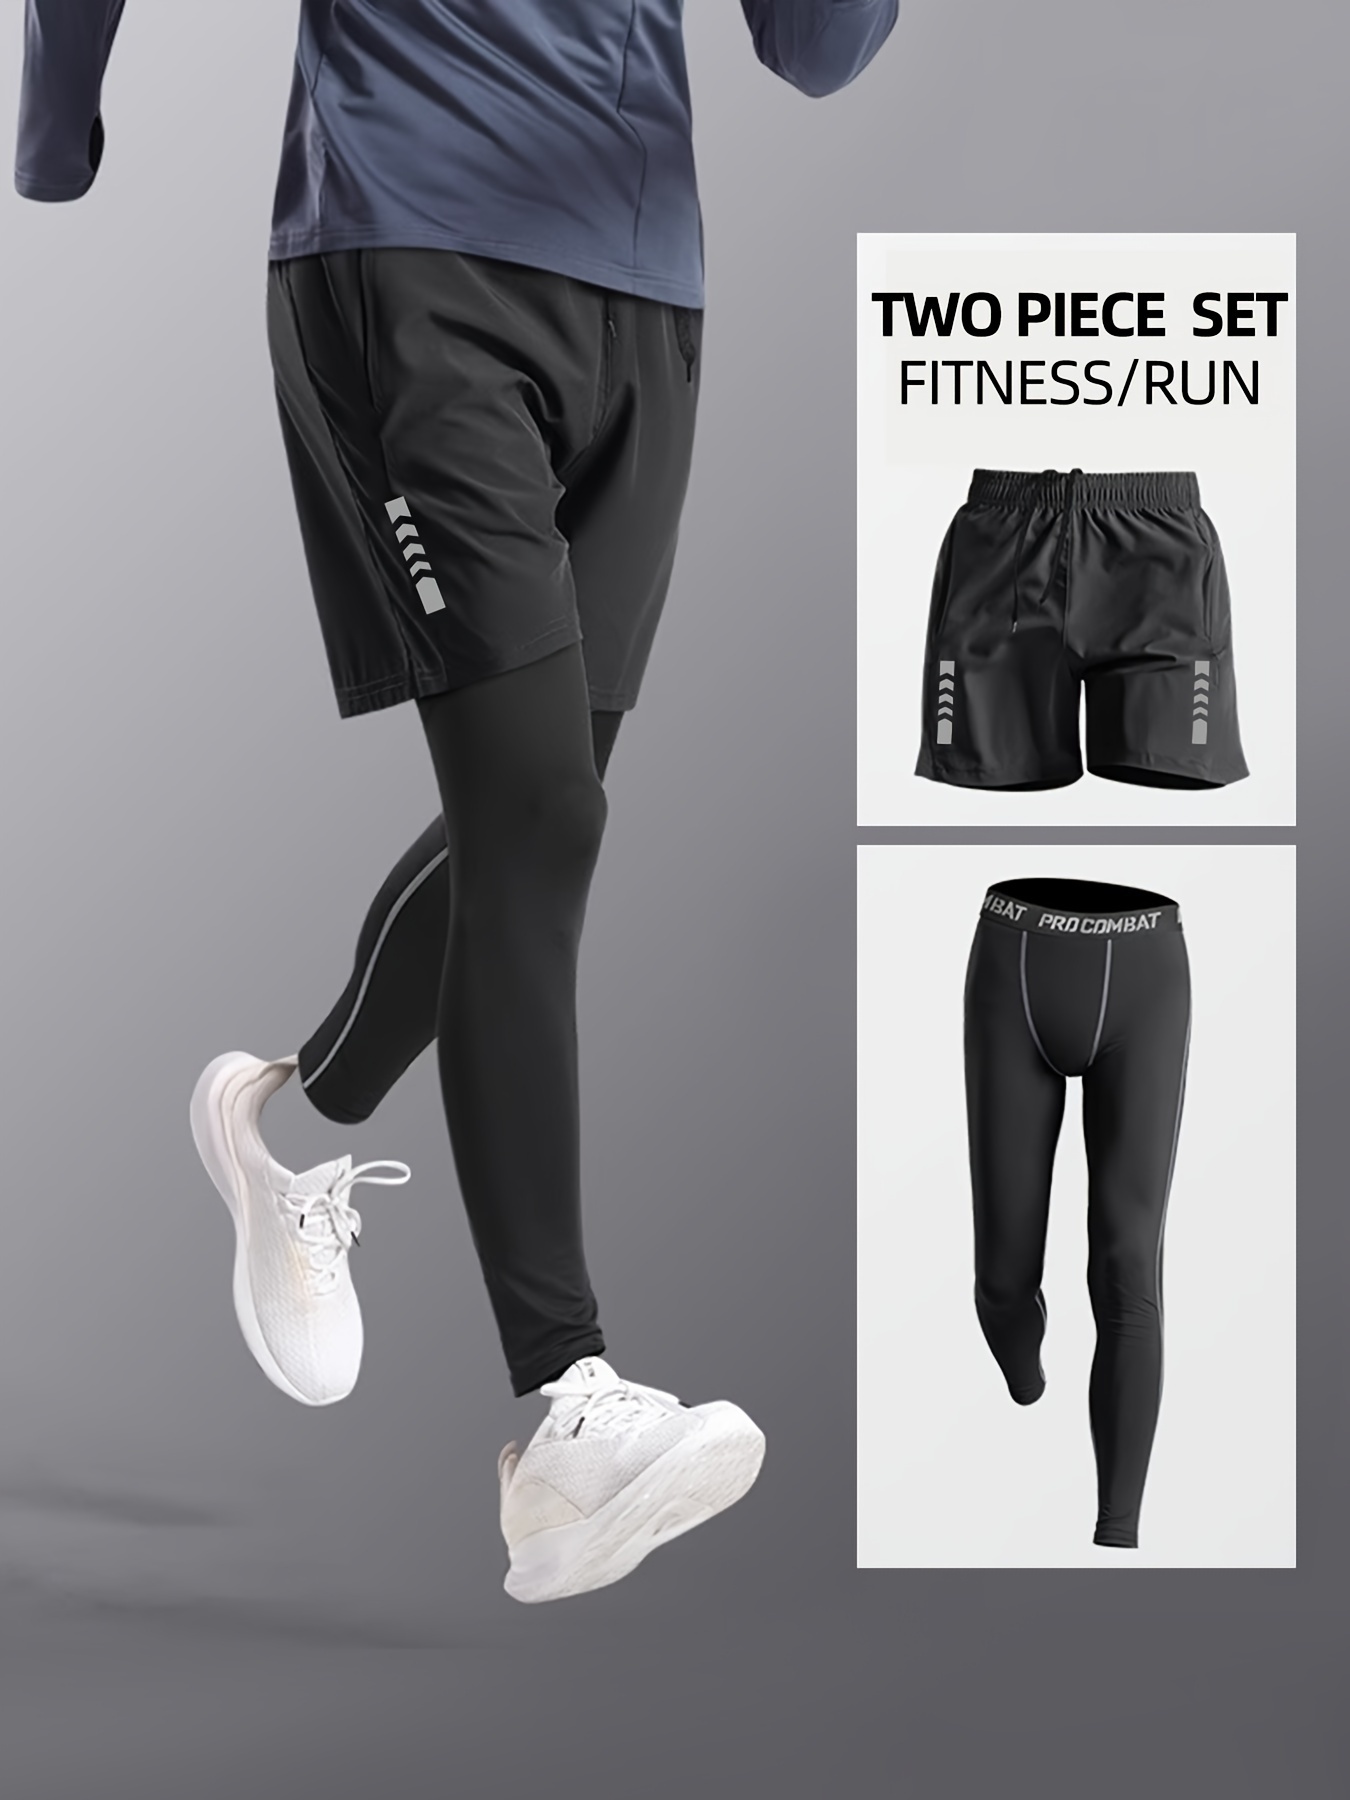 Men's 2 in 1 Running Pants Shorts with Pockets Gym Short Compression Tights  Training Sweatpants Workout Leggings